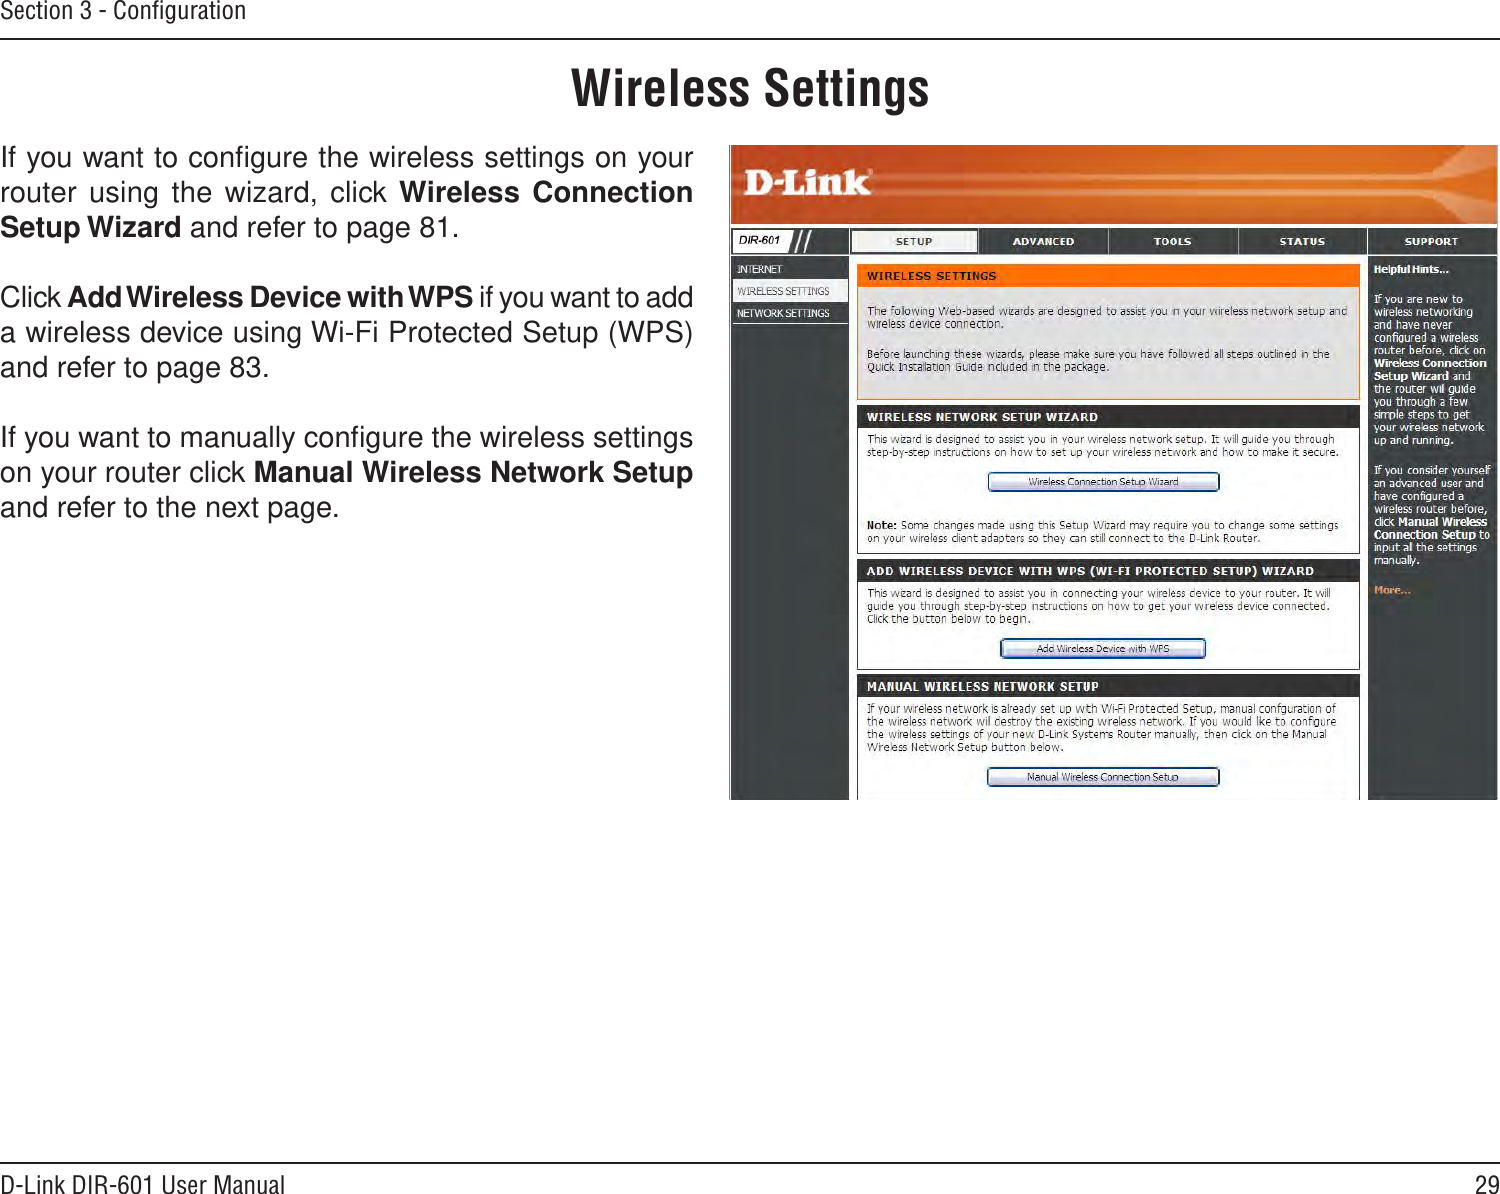 29D-Link DIR-601 User ManualSection 3 - ConﬁgurationWireless SettingsIf you want to conﬁgure the wireless settings on your router using the wizard, click Wireless Connection  Setup Wizard and refer to page 81.Click Add Wireless Device with WPS if you want to add a wireless device using Wi-Fi Protected Setup (WPS) and refer to page 83.If you want to manually conﬁgure the wireless settings on your router click Manual Wireless Network Setup and refer to the next page.